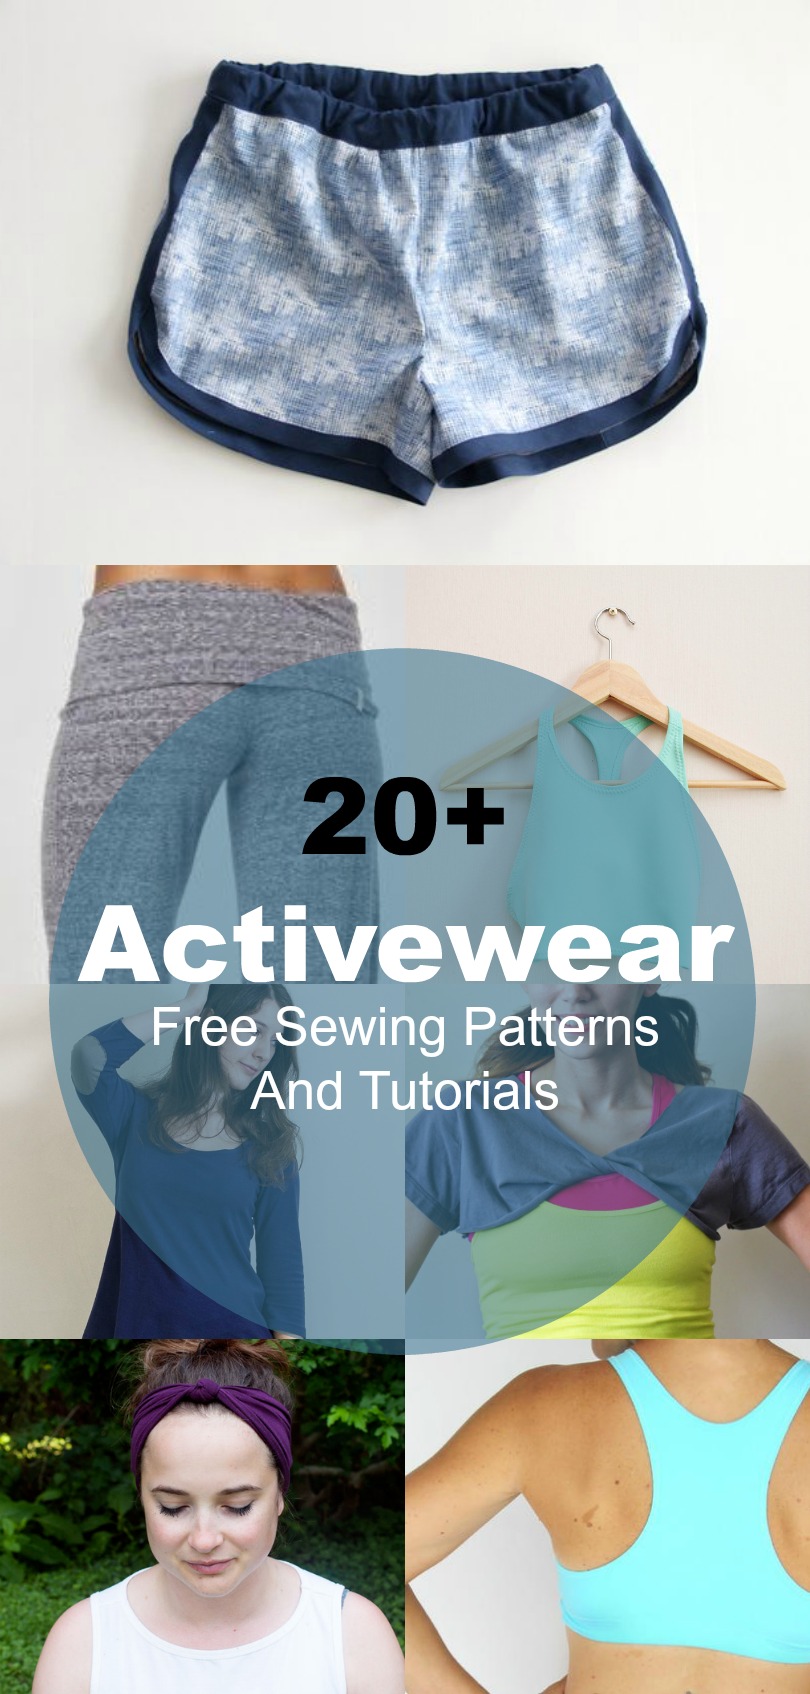 20+ Free Sewing patterns for Athletic Wear